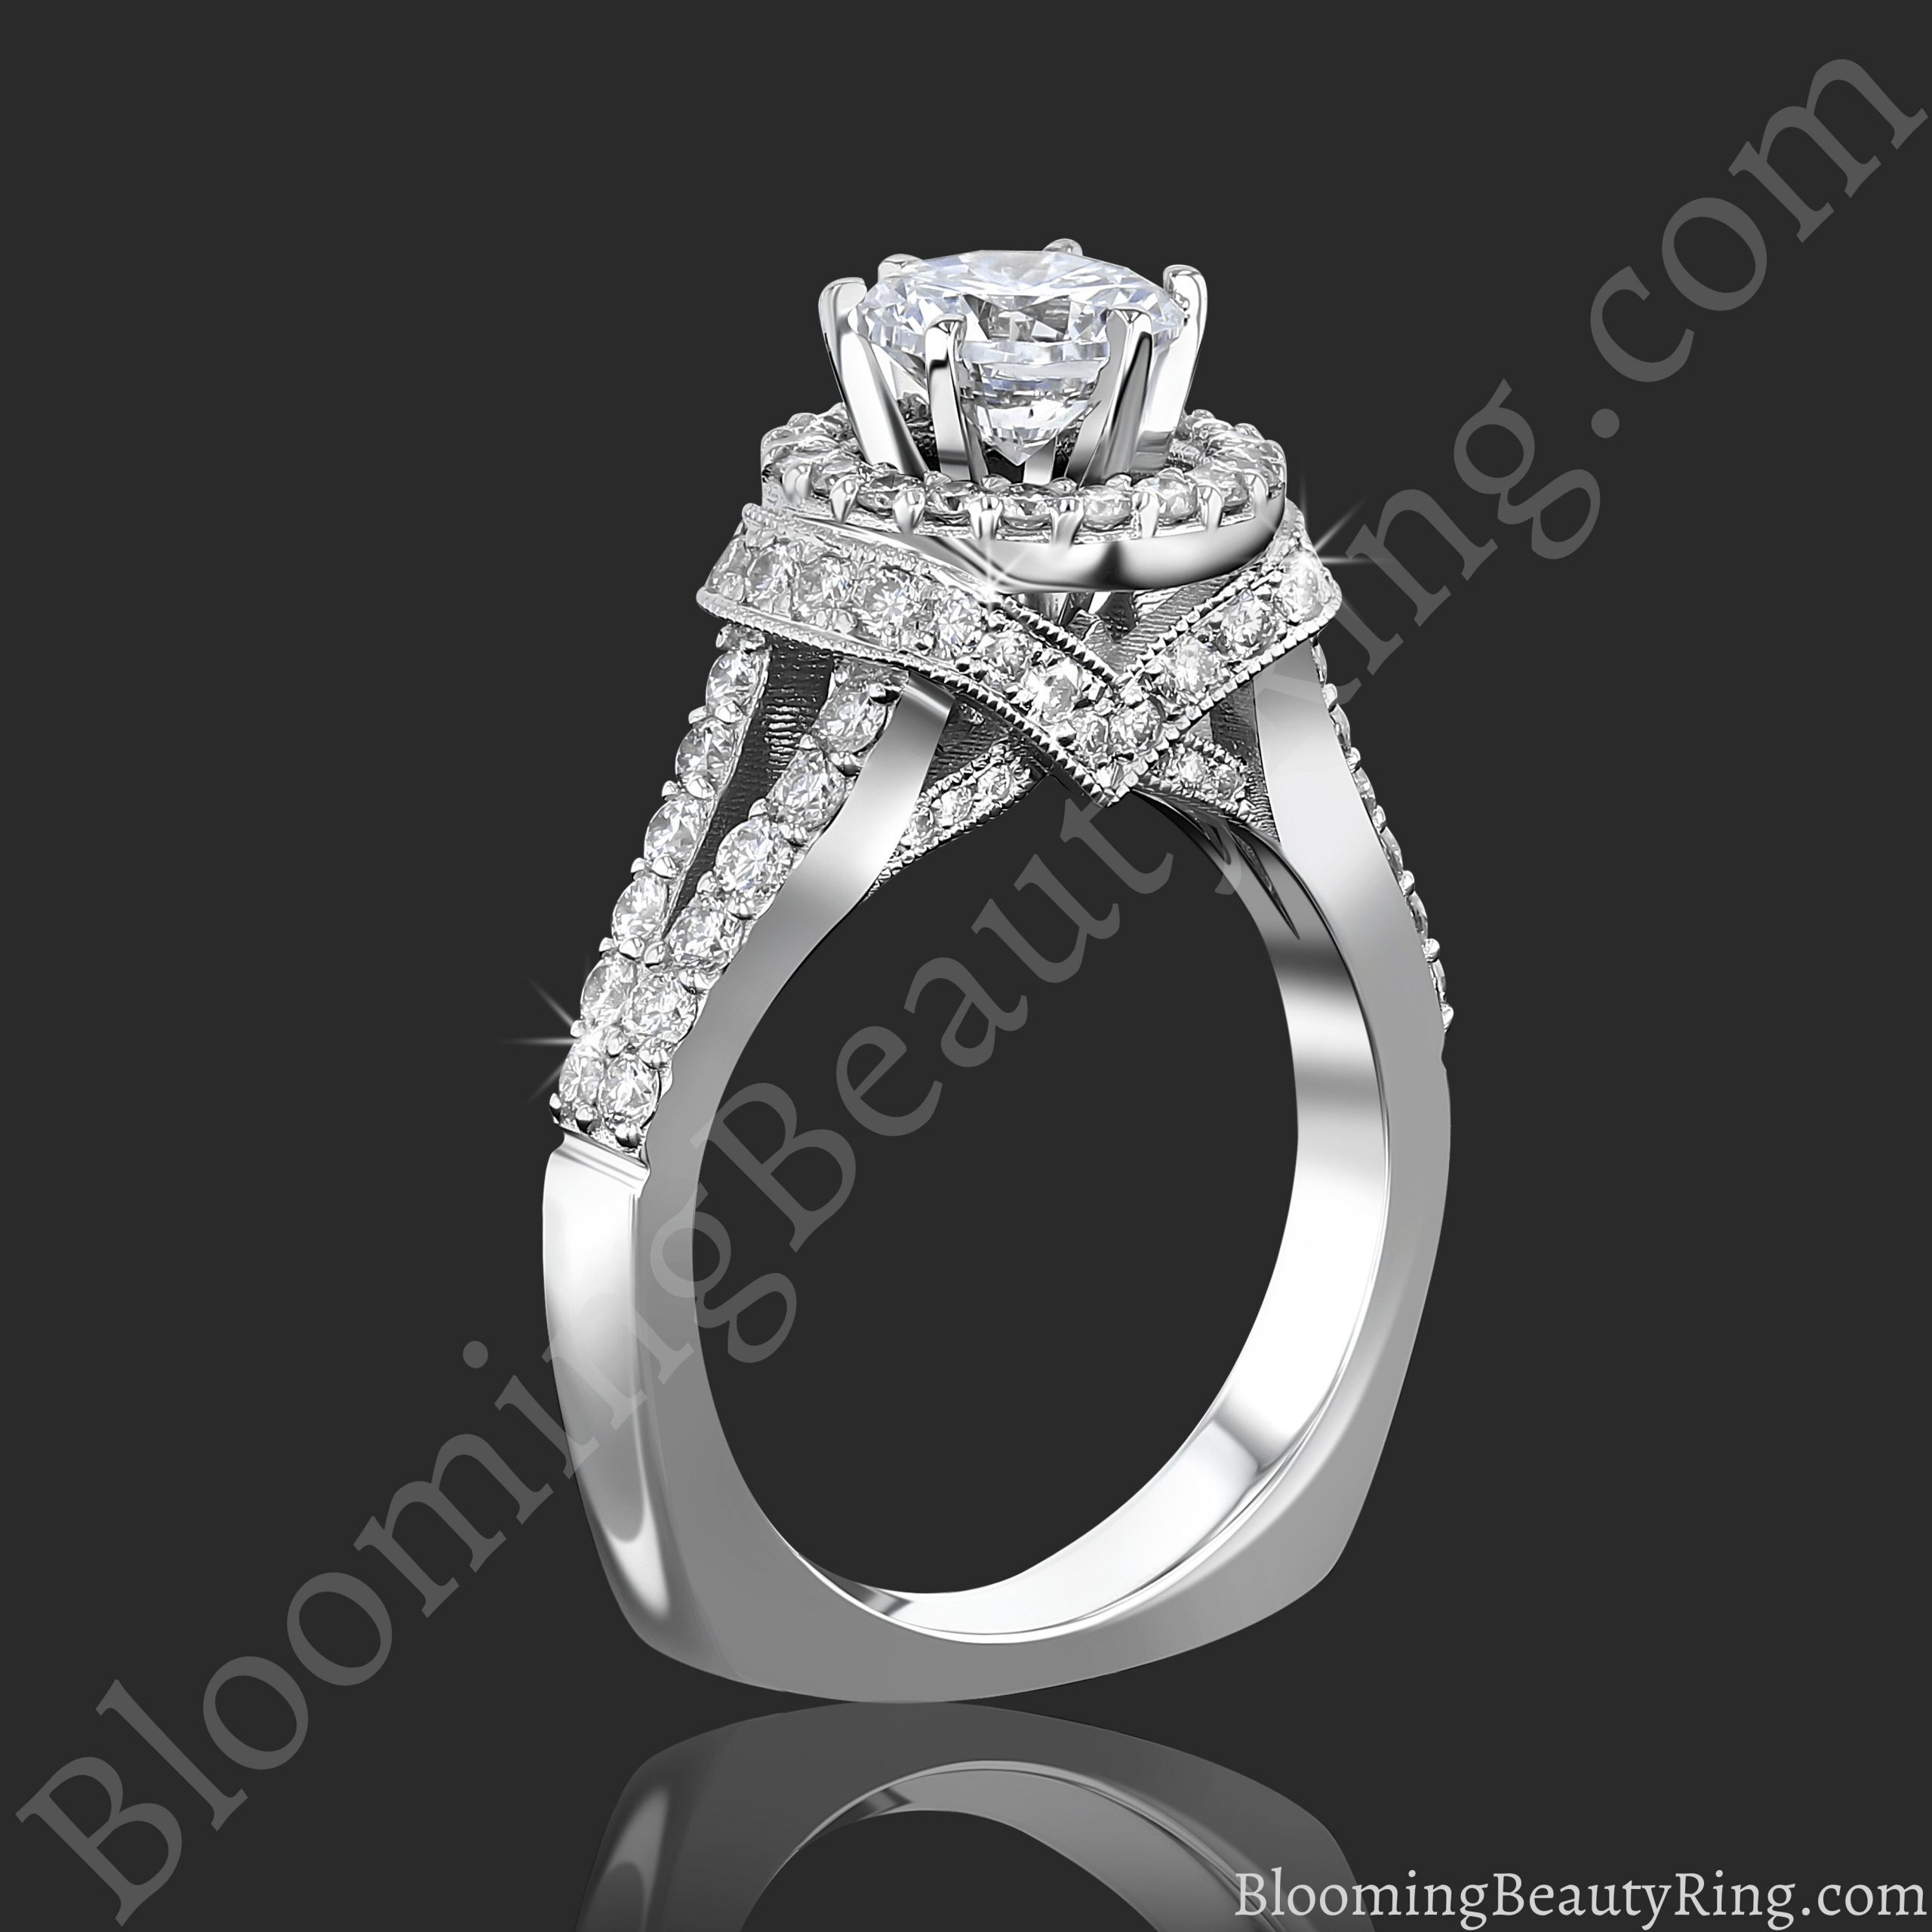 Breathtaking 1.60 ctw Halo Diamond Engagement Ring Handmade In The USA To Perfection bbr733